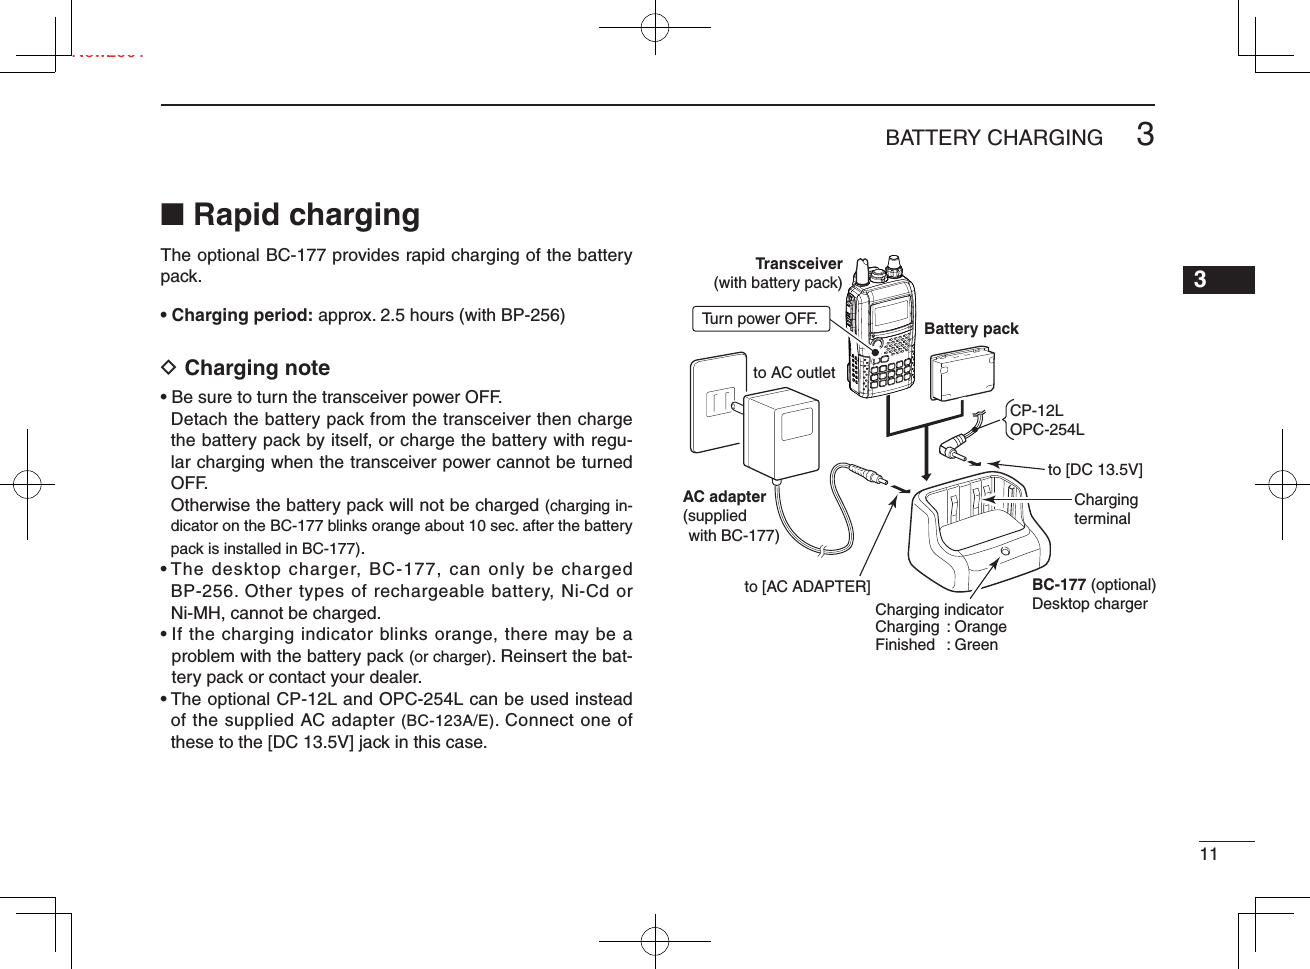 113BATTERY CHARGINGNew20013■ Rapid chargingThe optional BC-177 provides rapid charging of the battery pack.• Charging period: approx. 2.5 hours (with BP-256)D Charging note• Be sure to turn the transceiver power OFF.Detach the battery pack from the transceiver then charge the battery pack by itself, or charge the battery with regu-lar charging when the transceiver power cannot be turned OFF.Otherwise the battery pack will not be charged (charging in-dicator on the BC-177 blinks orange about 10 sec. after the battery pack is installed in BC-177).•  The desktop charger, BC-177, can only be charged BP-256. Other types of rechargeable battery, Ni-Cd or Ni-MH, cannot be charged.•  If the charging indicator blinks orange, there may be a problem with the battery pack (or charger). Reinsert the bat-tery pack or contact your dealer.•  The optional CP-12L and OPC-254L can be used instead of the supplied AC adapter (BC-123A/E). Connect one of these to the [DC 13.5V] jack in this case.Transceiver(with battery pack)Turn power OFF. Battery packto AC outletBC-177 (optional)Desktop chargerto [AC ADAPTER]to [DC 13.5V]CP-12LOPC-254LCharging indicatorCharging : OrangeFinished : GreenCharging terminalAC adapter(suppliedwith BC-177)